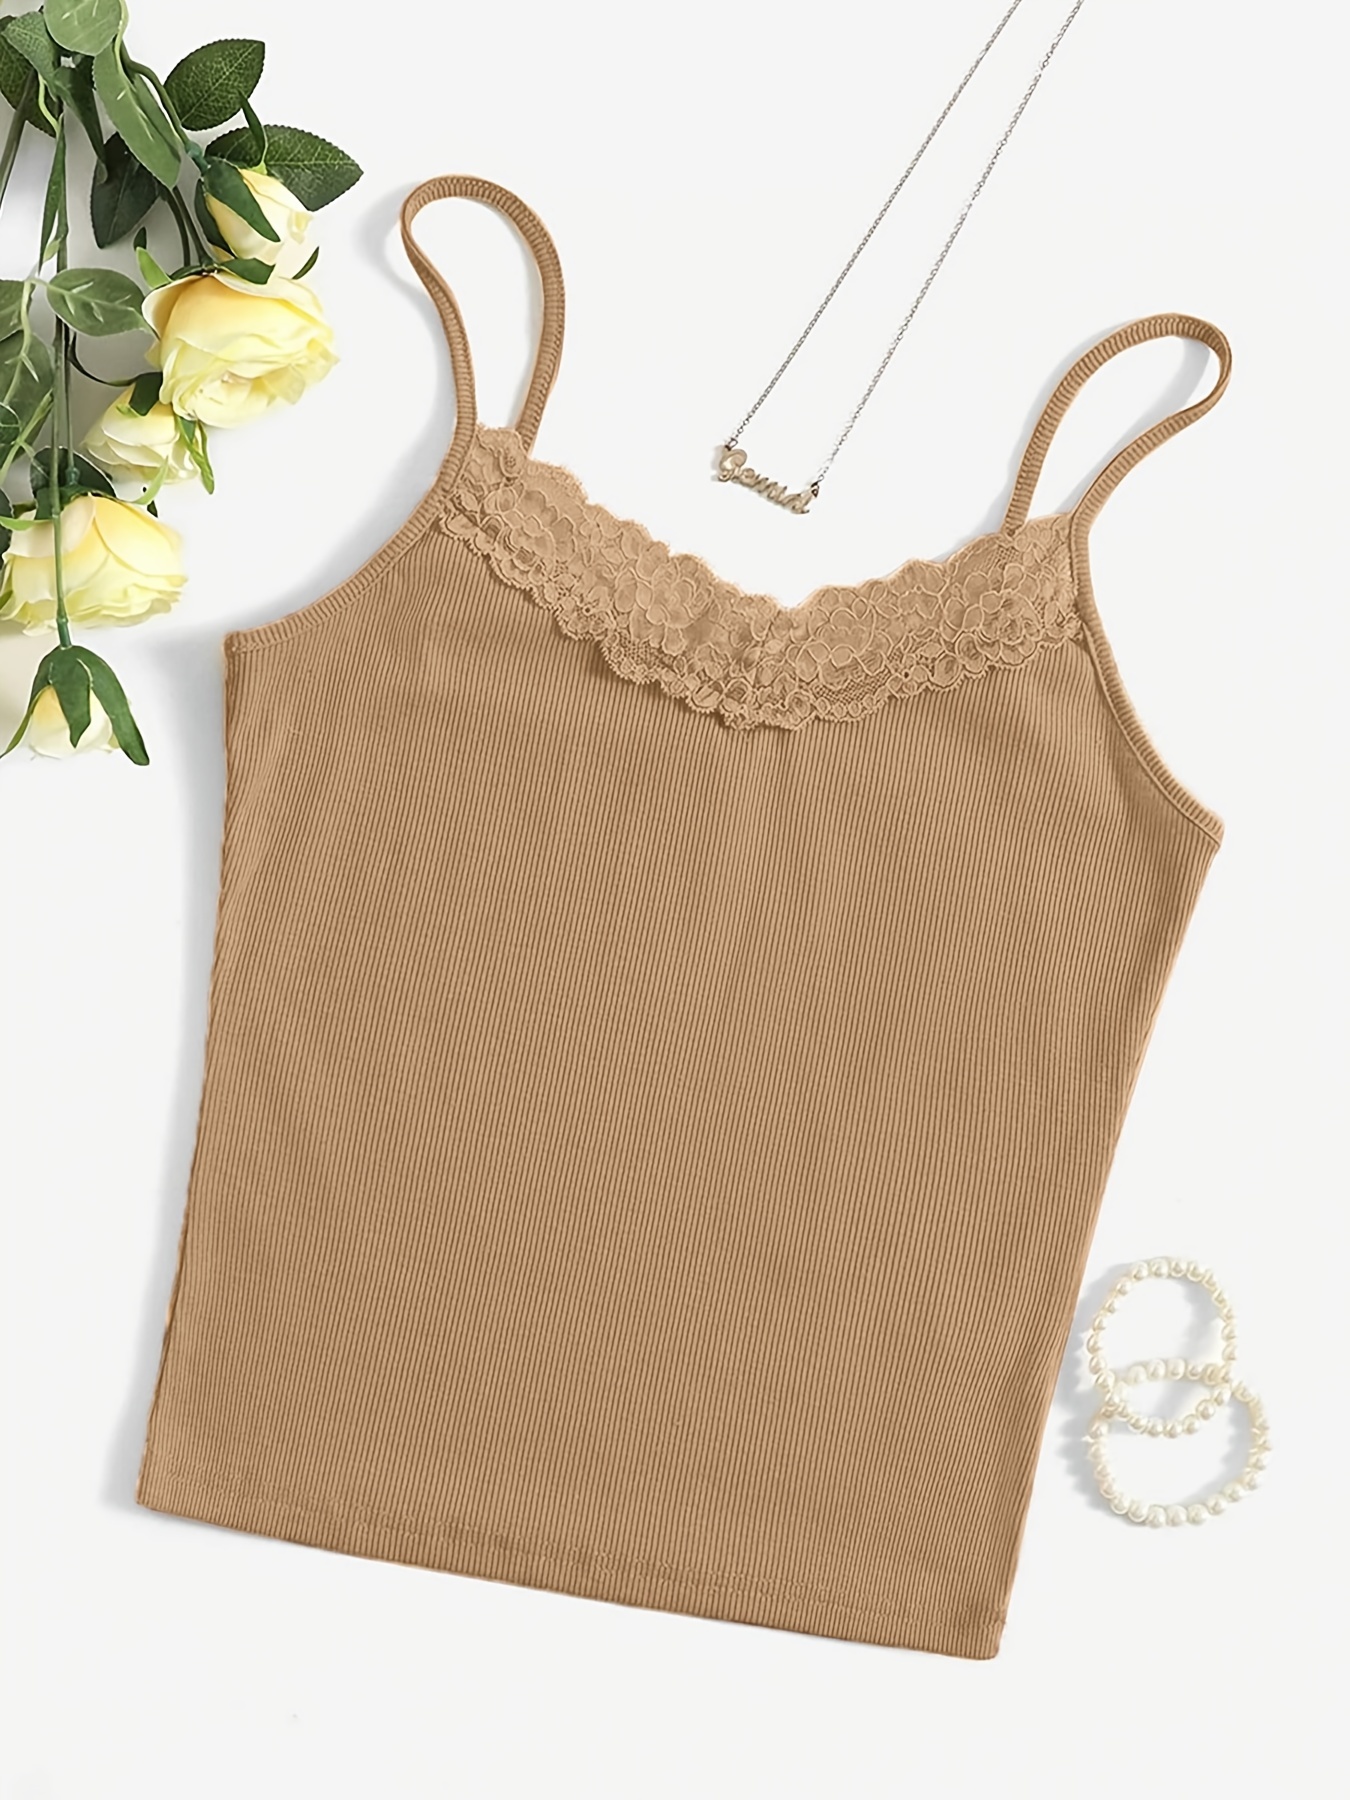 Women's V Neck Spaghetti Strap Cami Padded Crop Tank Top with